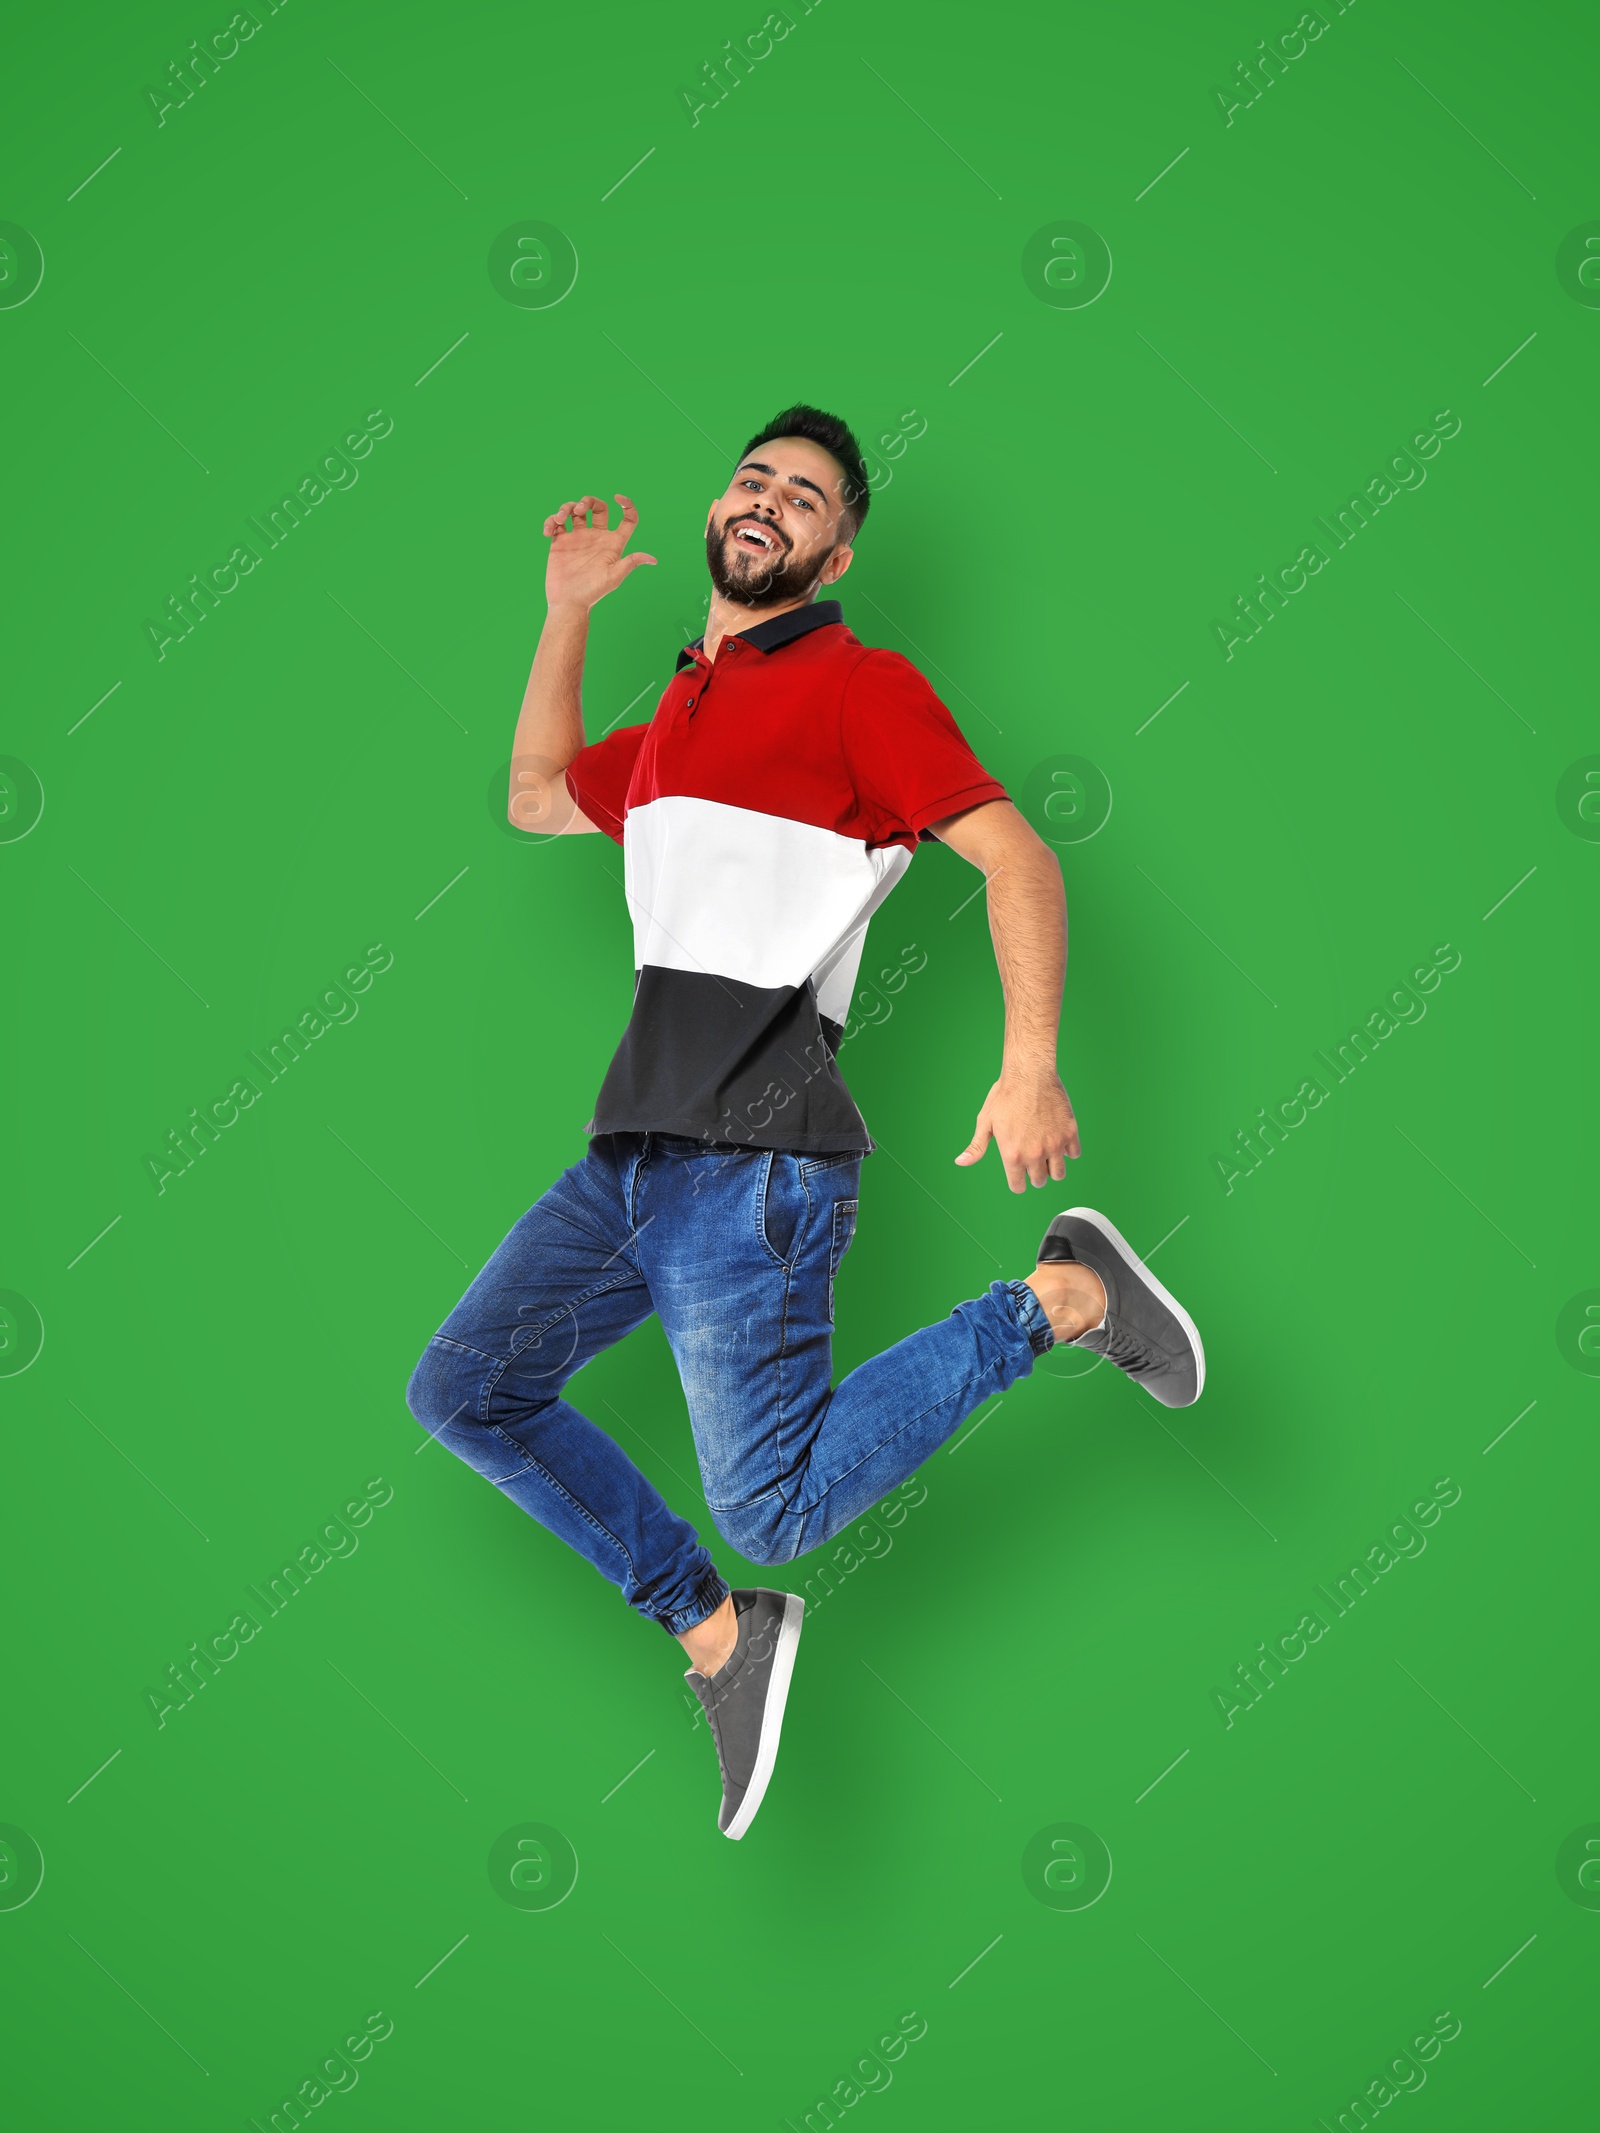 Image of Positive young man jumping on green background